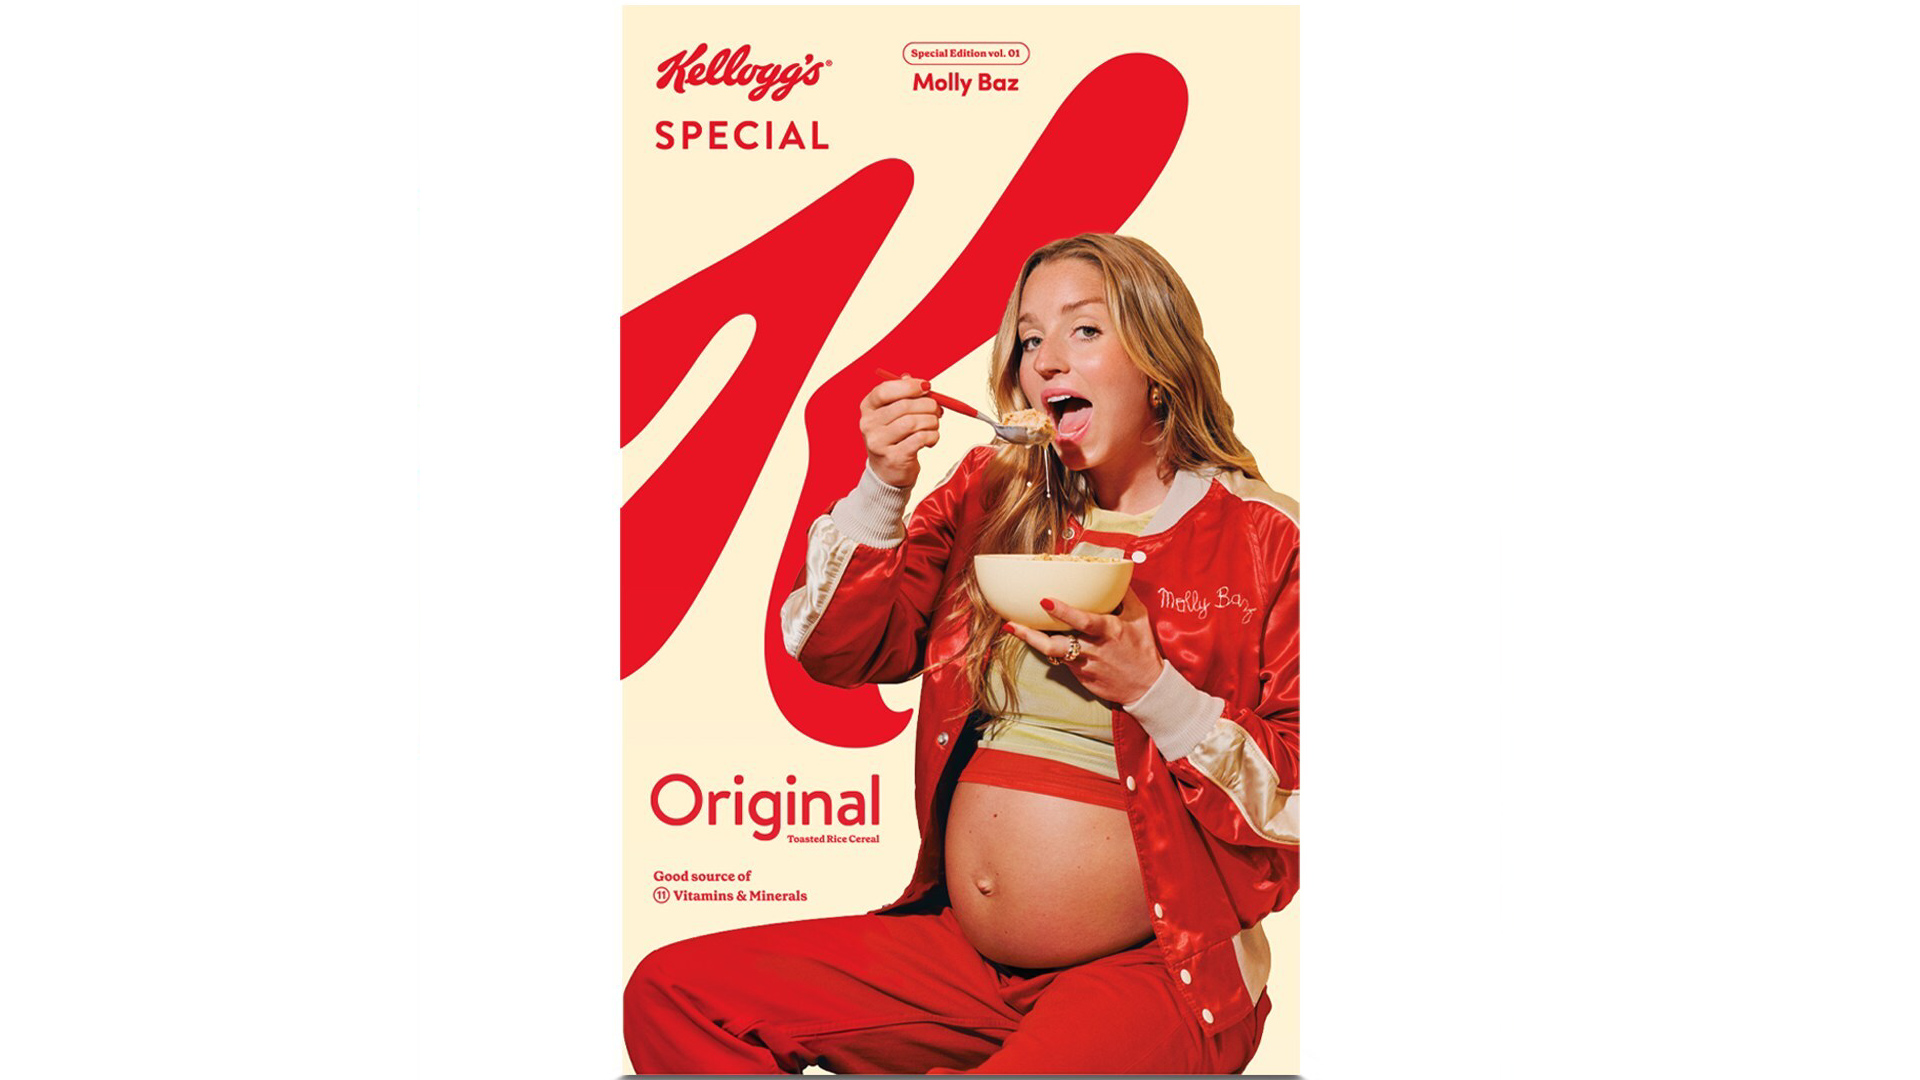 A pregnant woman will be featured on a cereal box for the first time as Kellogg’s Special K partners with Molly Baz.